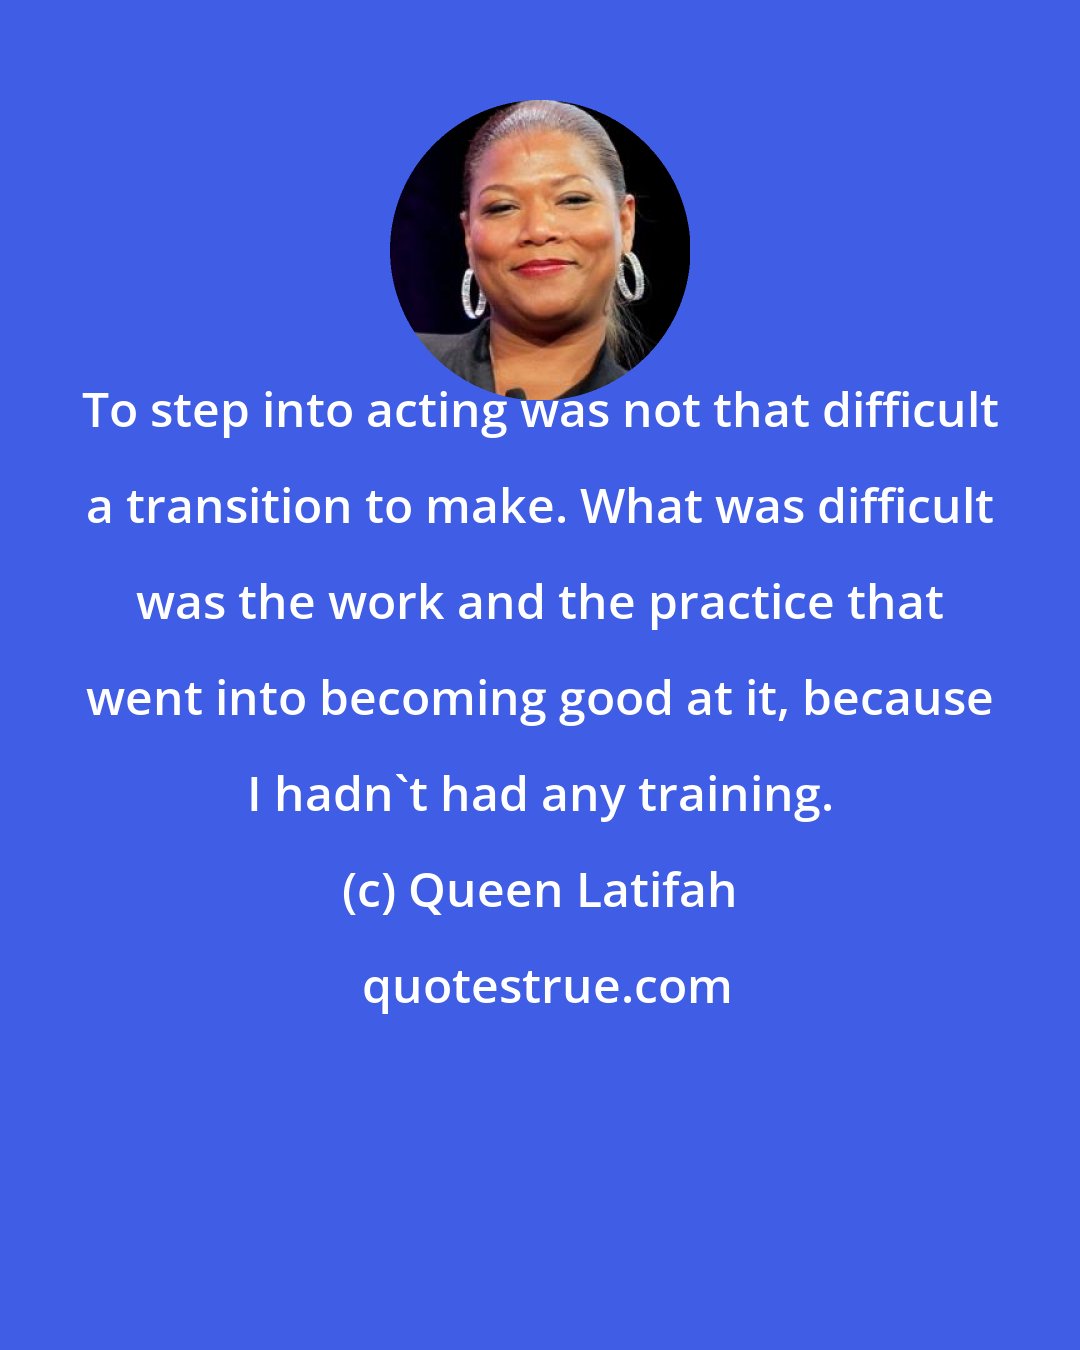 Queen Latifah: To step into acting was not that difficult a transition to make. What was difficult was the work and the practice that went into becoming good at it, because I hadn't had any training.